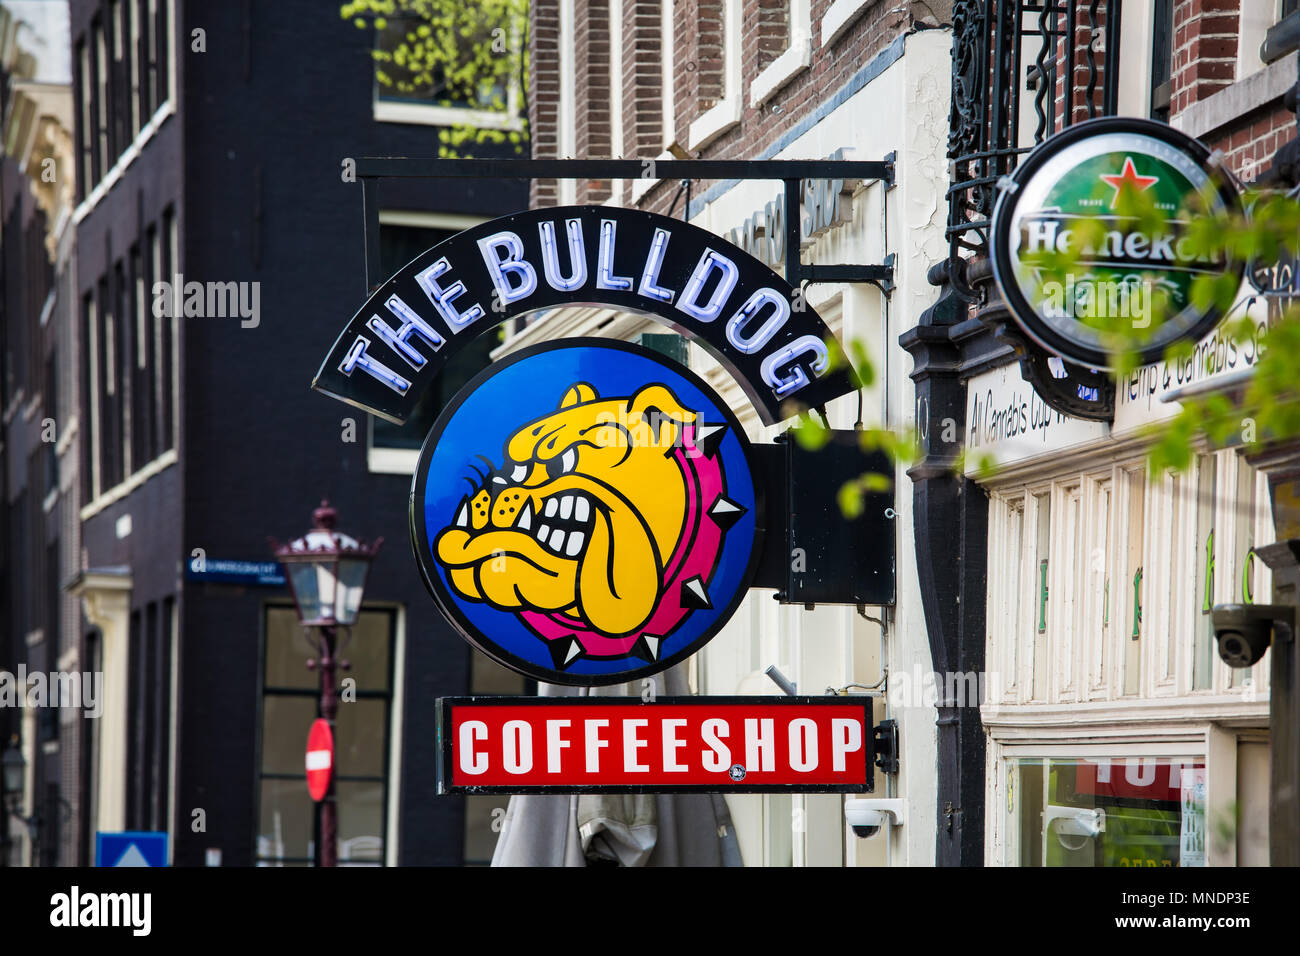 Amsterdam, Netherlands - April, 2018: The famous coffeshop Bulldog in Amsterdam city, Netherlands Stock Photo